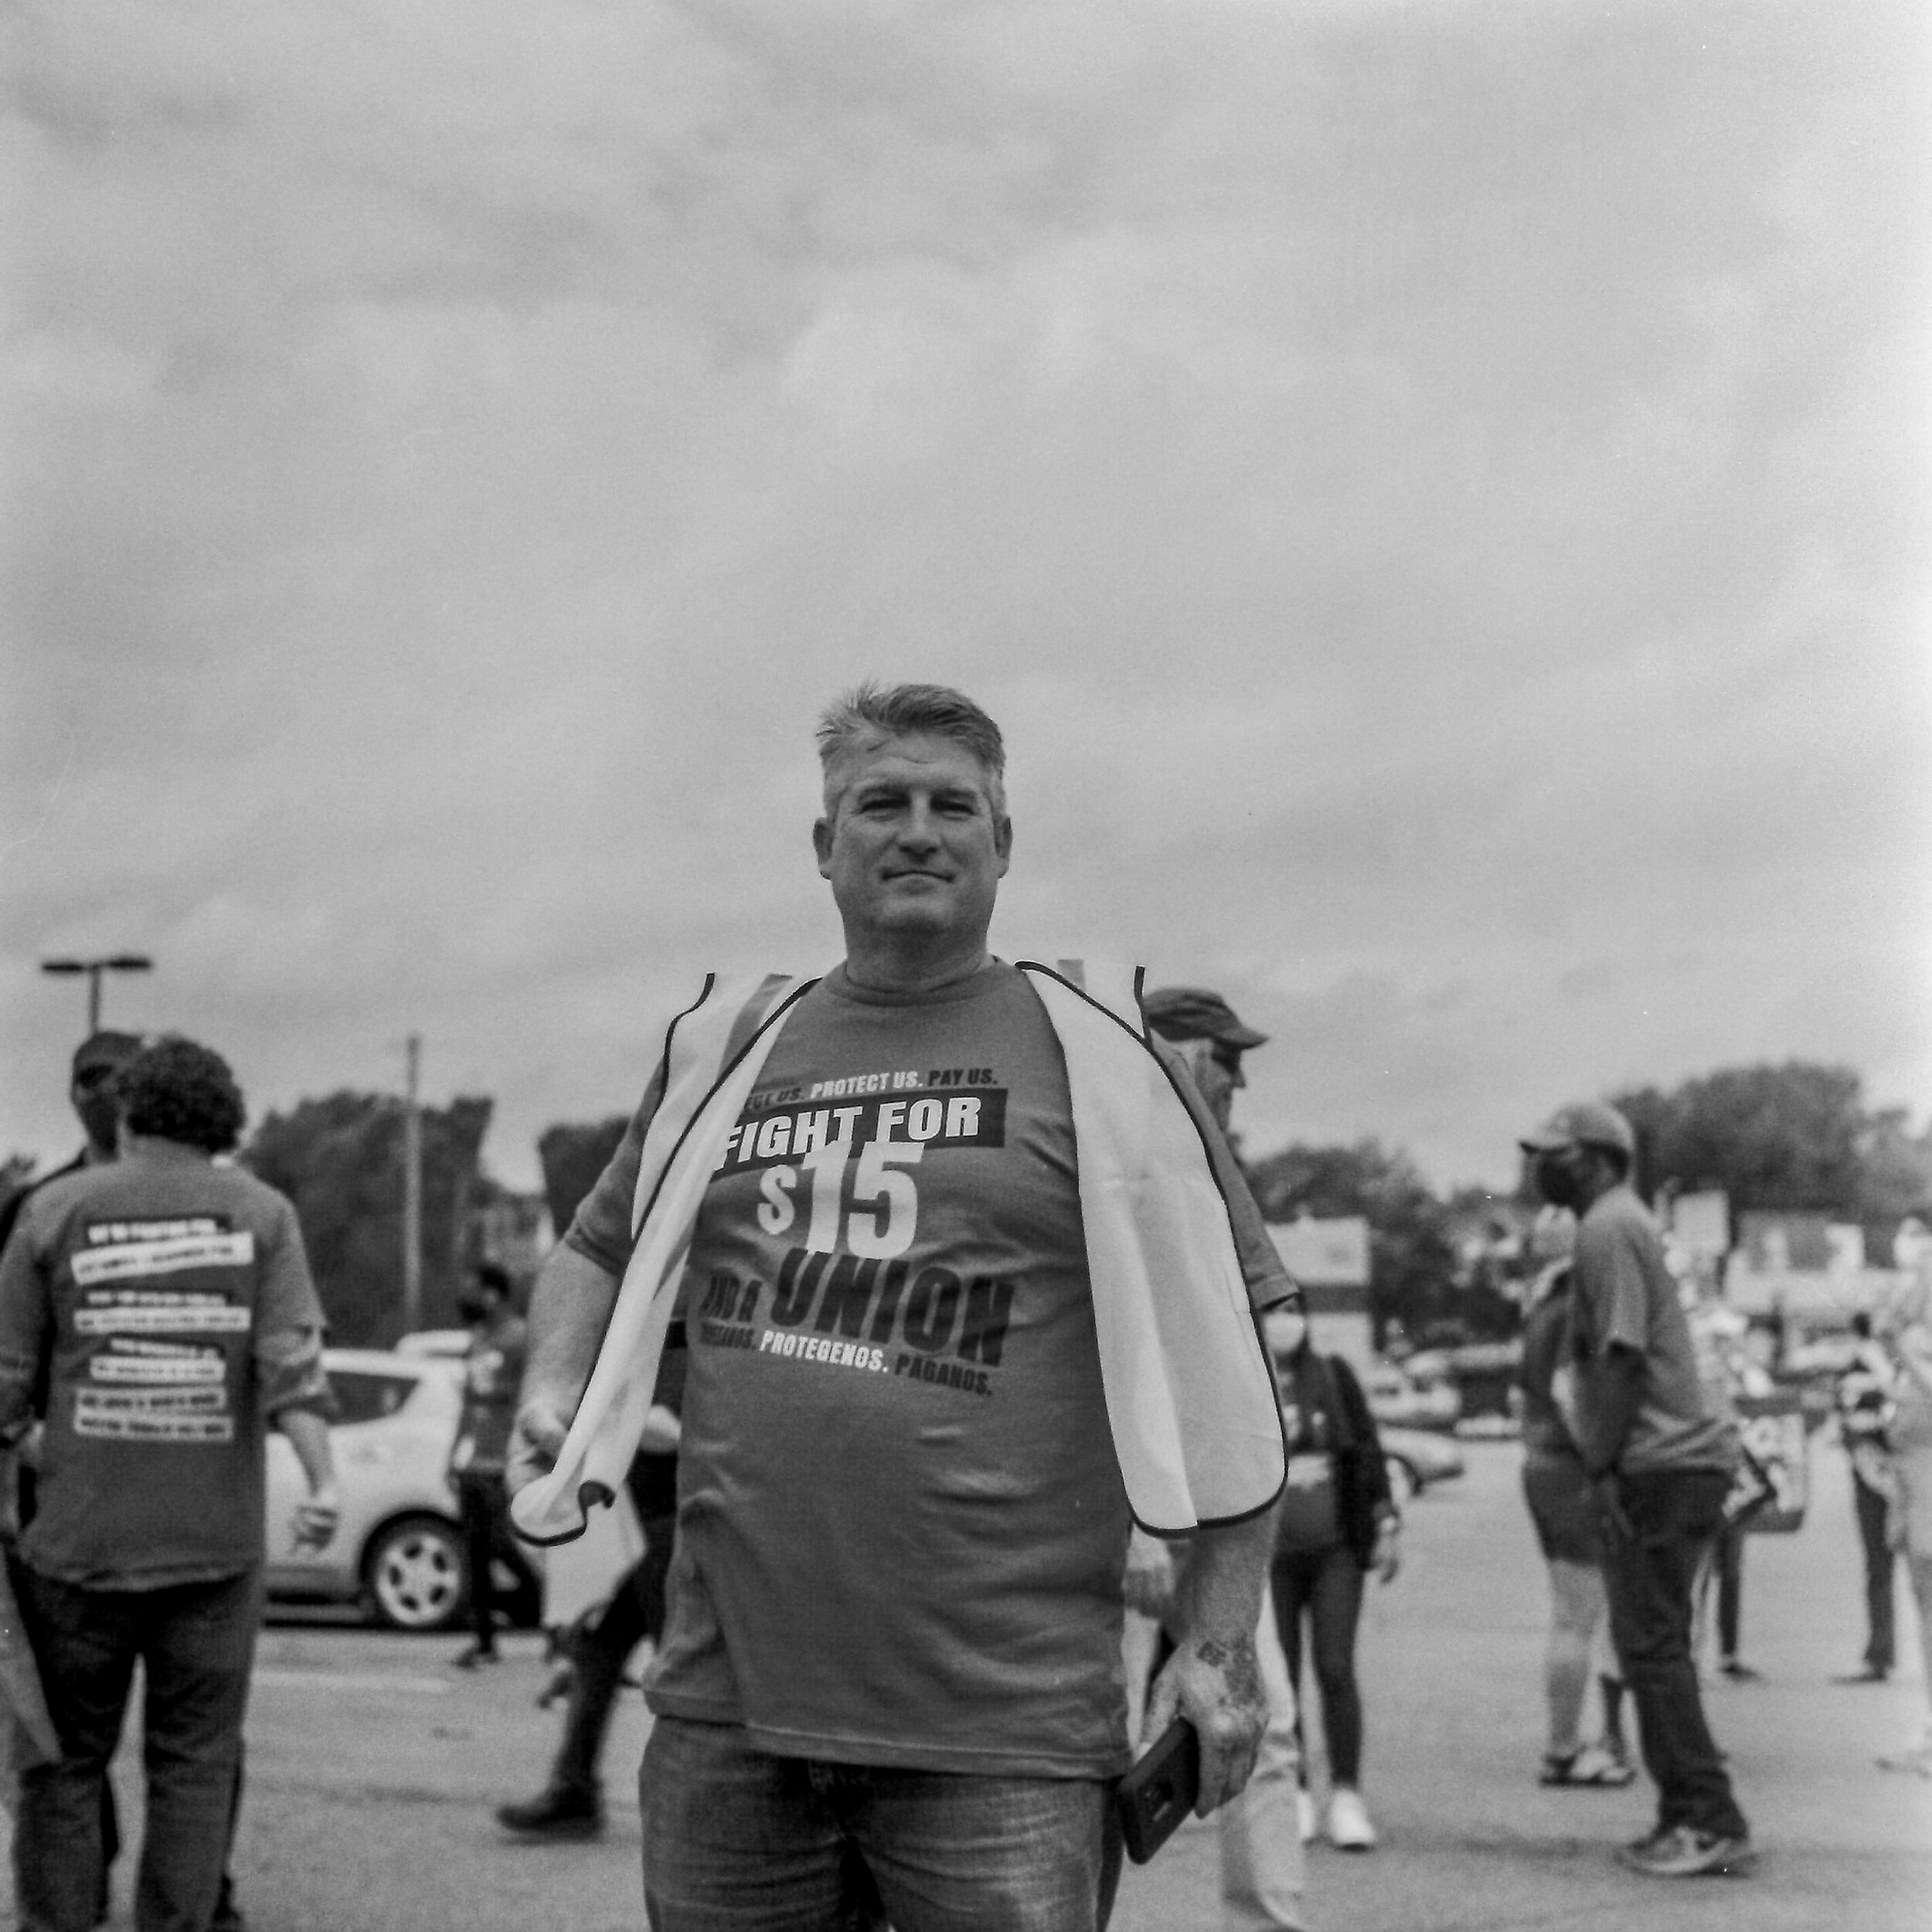 Union Member, Laborers Intnl. Union, St. Louis, Mo. 19 May 2021. 